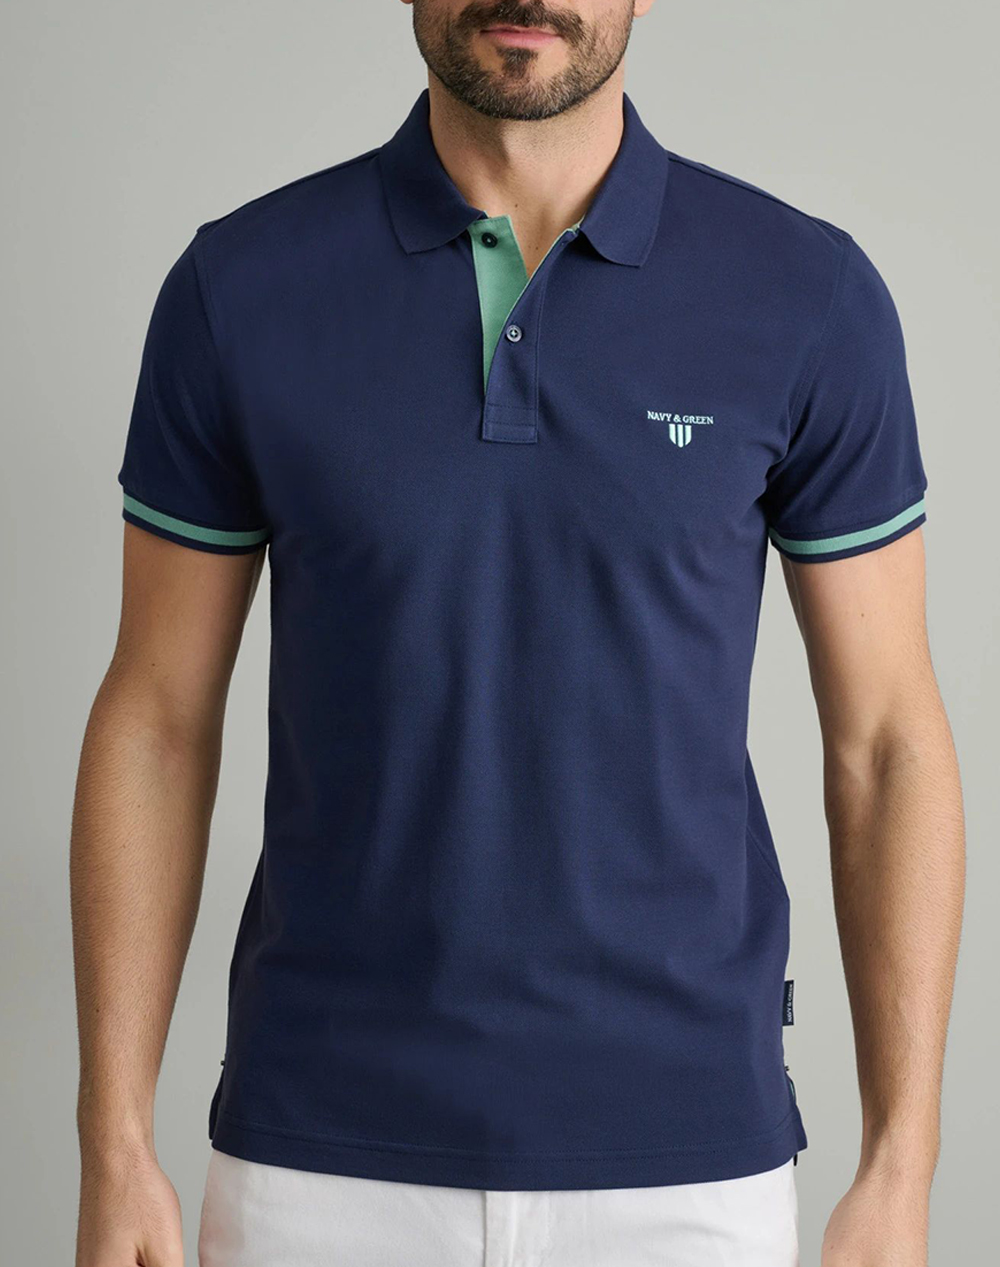 NAVY&GREEN POLO ΜΠΛΟΥΖΑΚΙ-YOUNG LINE 24GE.879/YL.2-MD BLUE DarkBlue 3820PNAVY3410098_7064